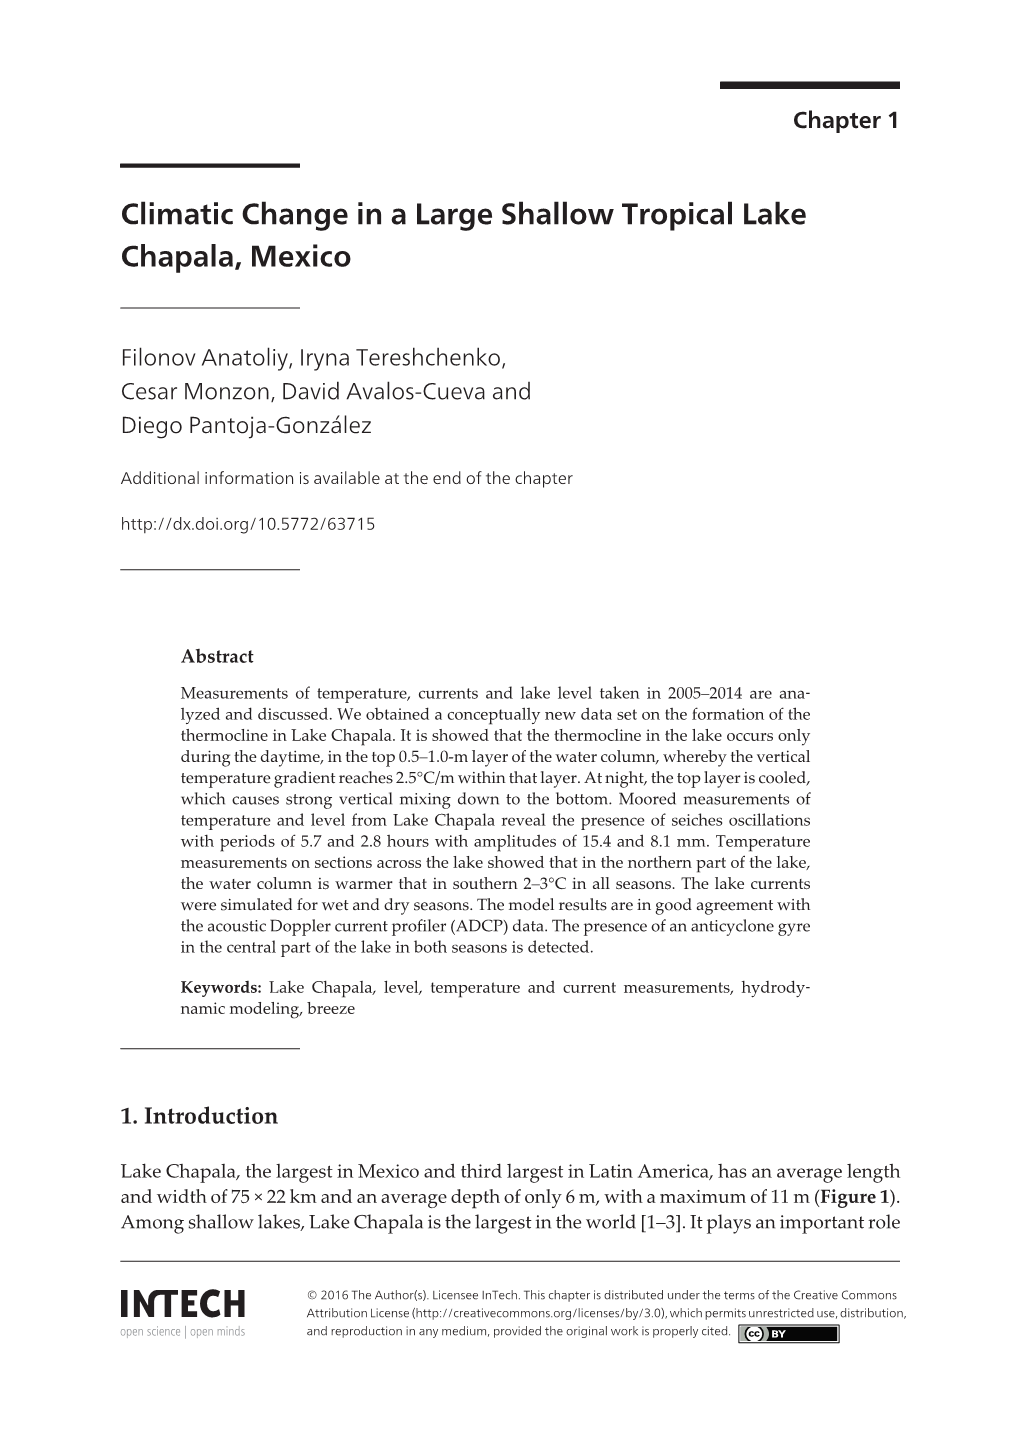 Climatic Change in a Large Shallow Tropical Lake Chapala, Mexico